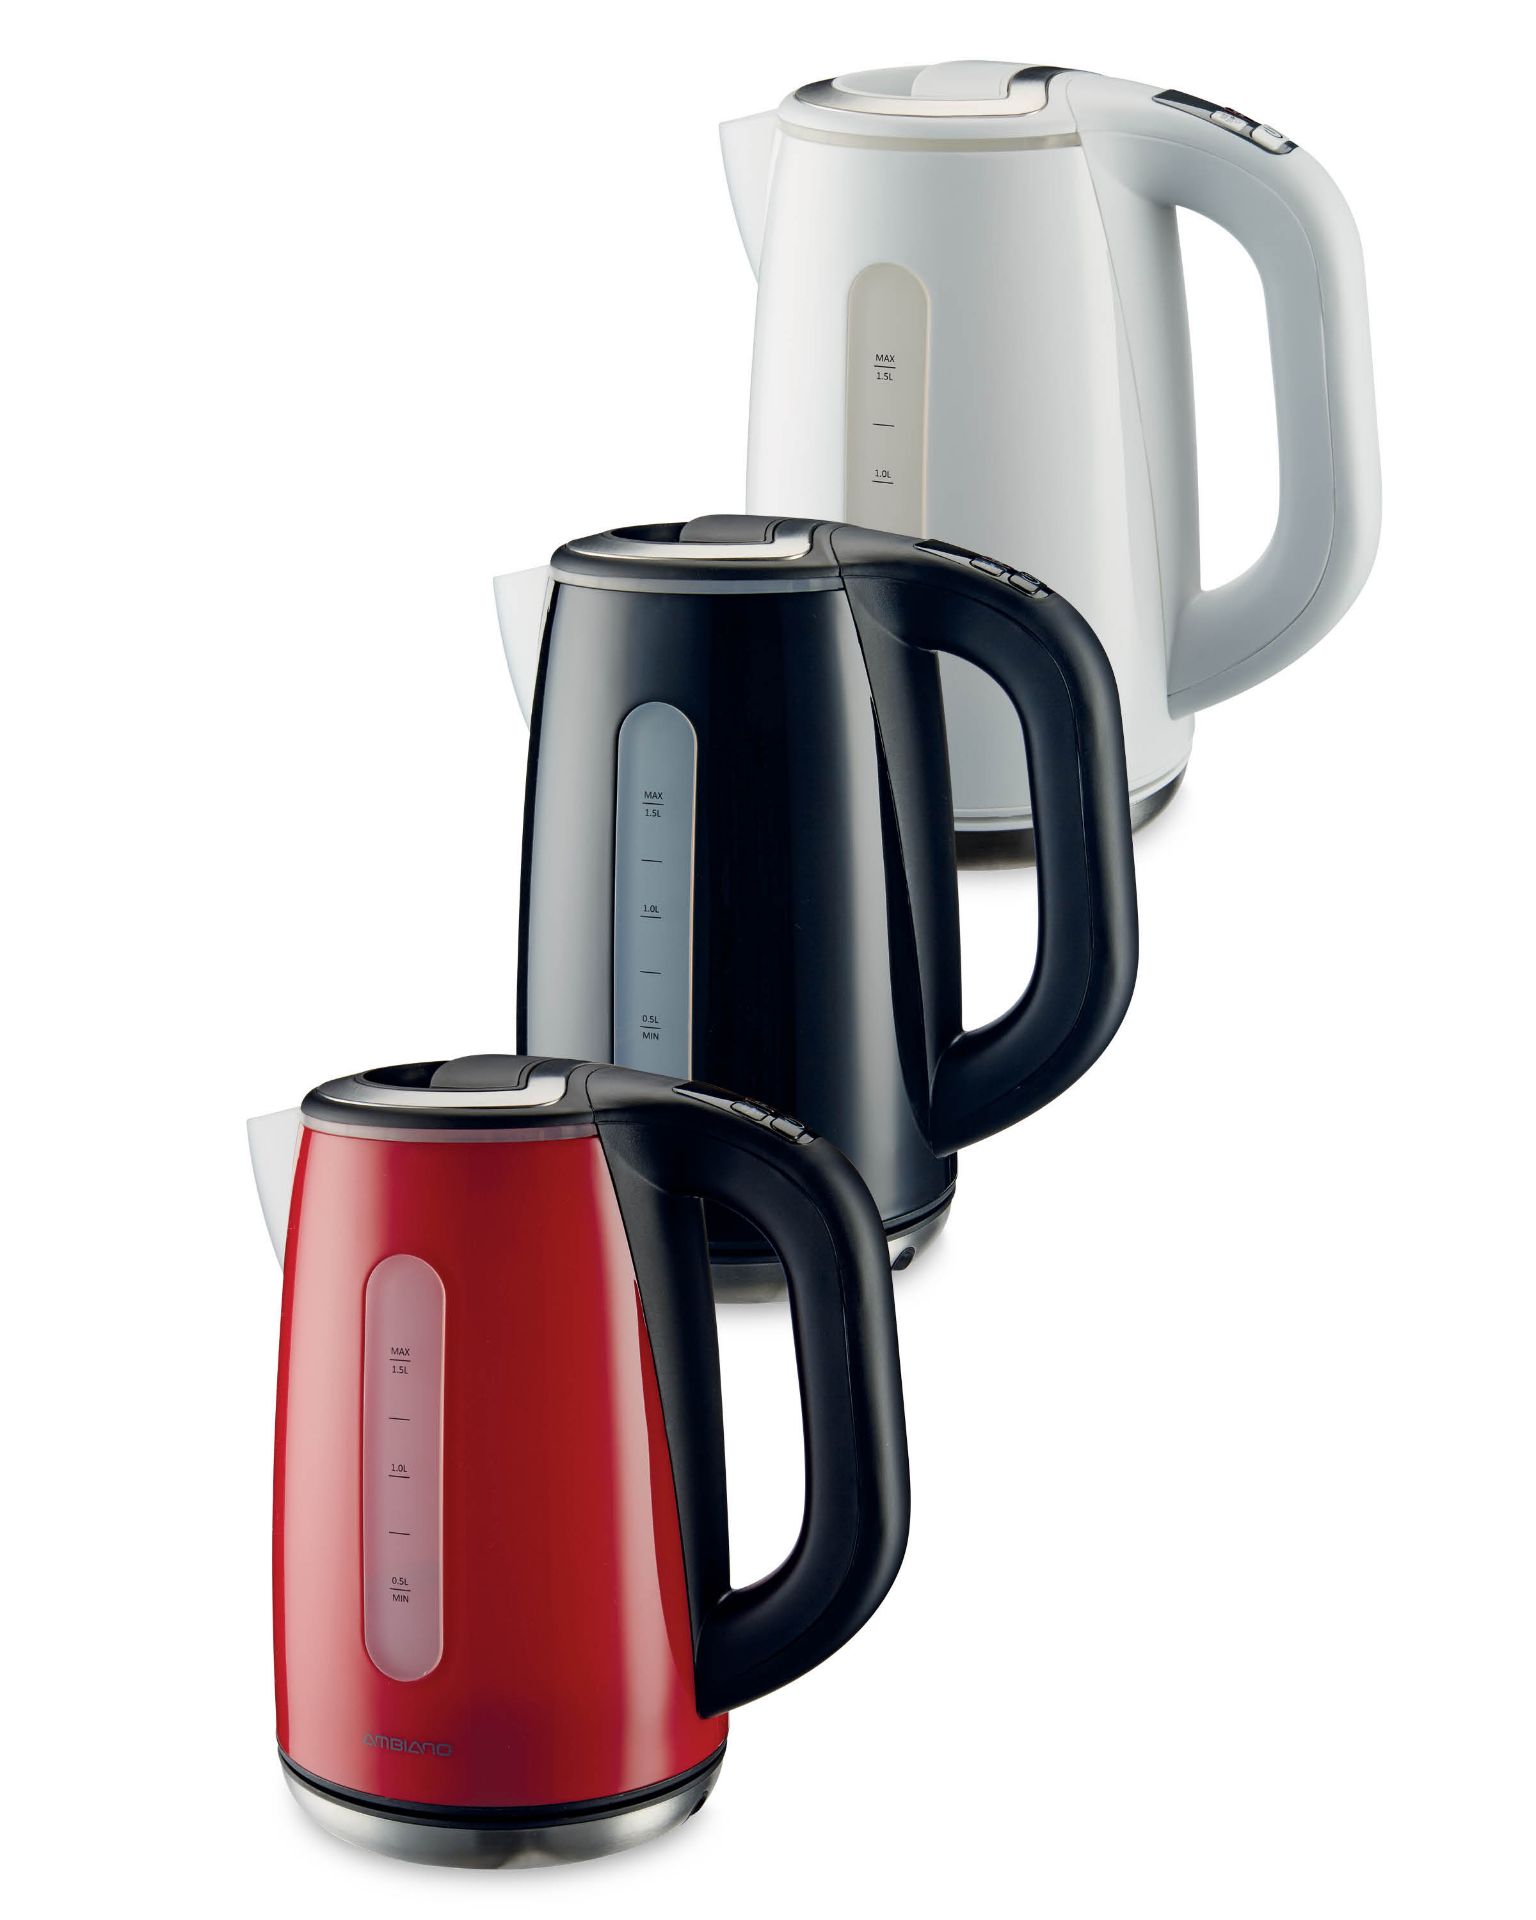 V Brand New Ambiano 2500-3000w 1.5 Litre Electronic Kettle